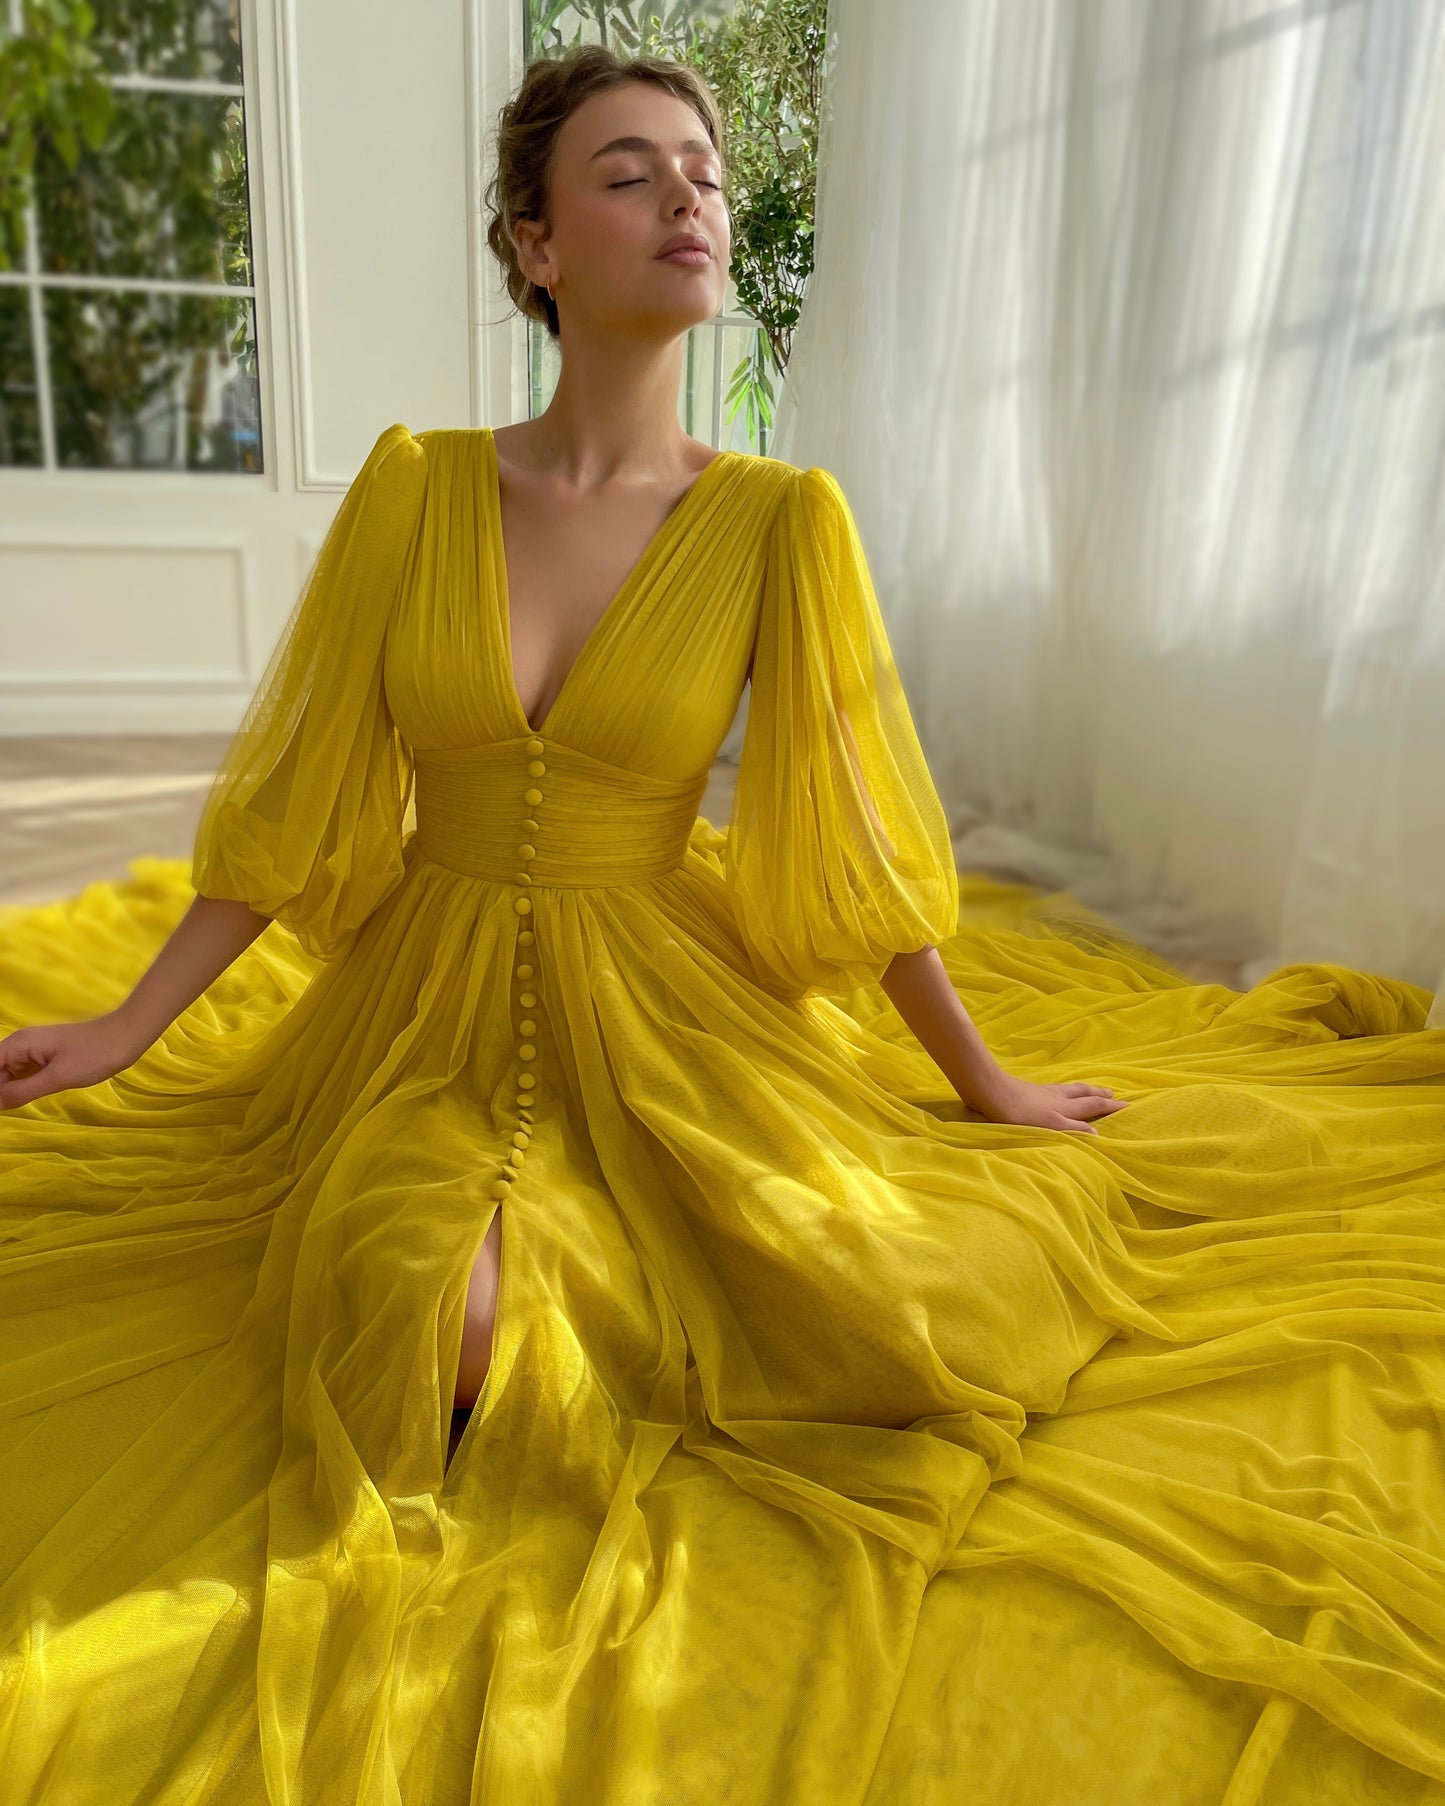 Yellow A-Line dress with long sleeves and v-neck